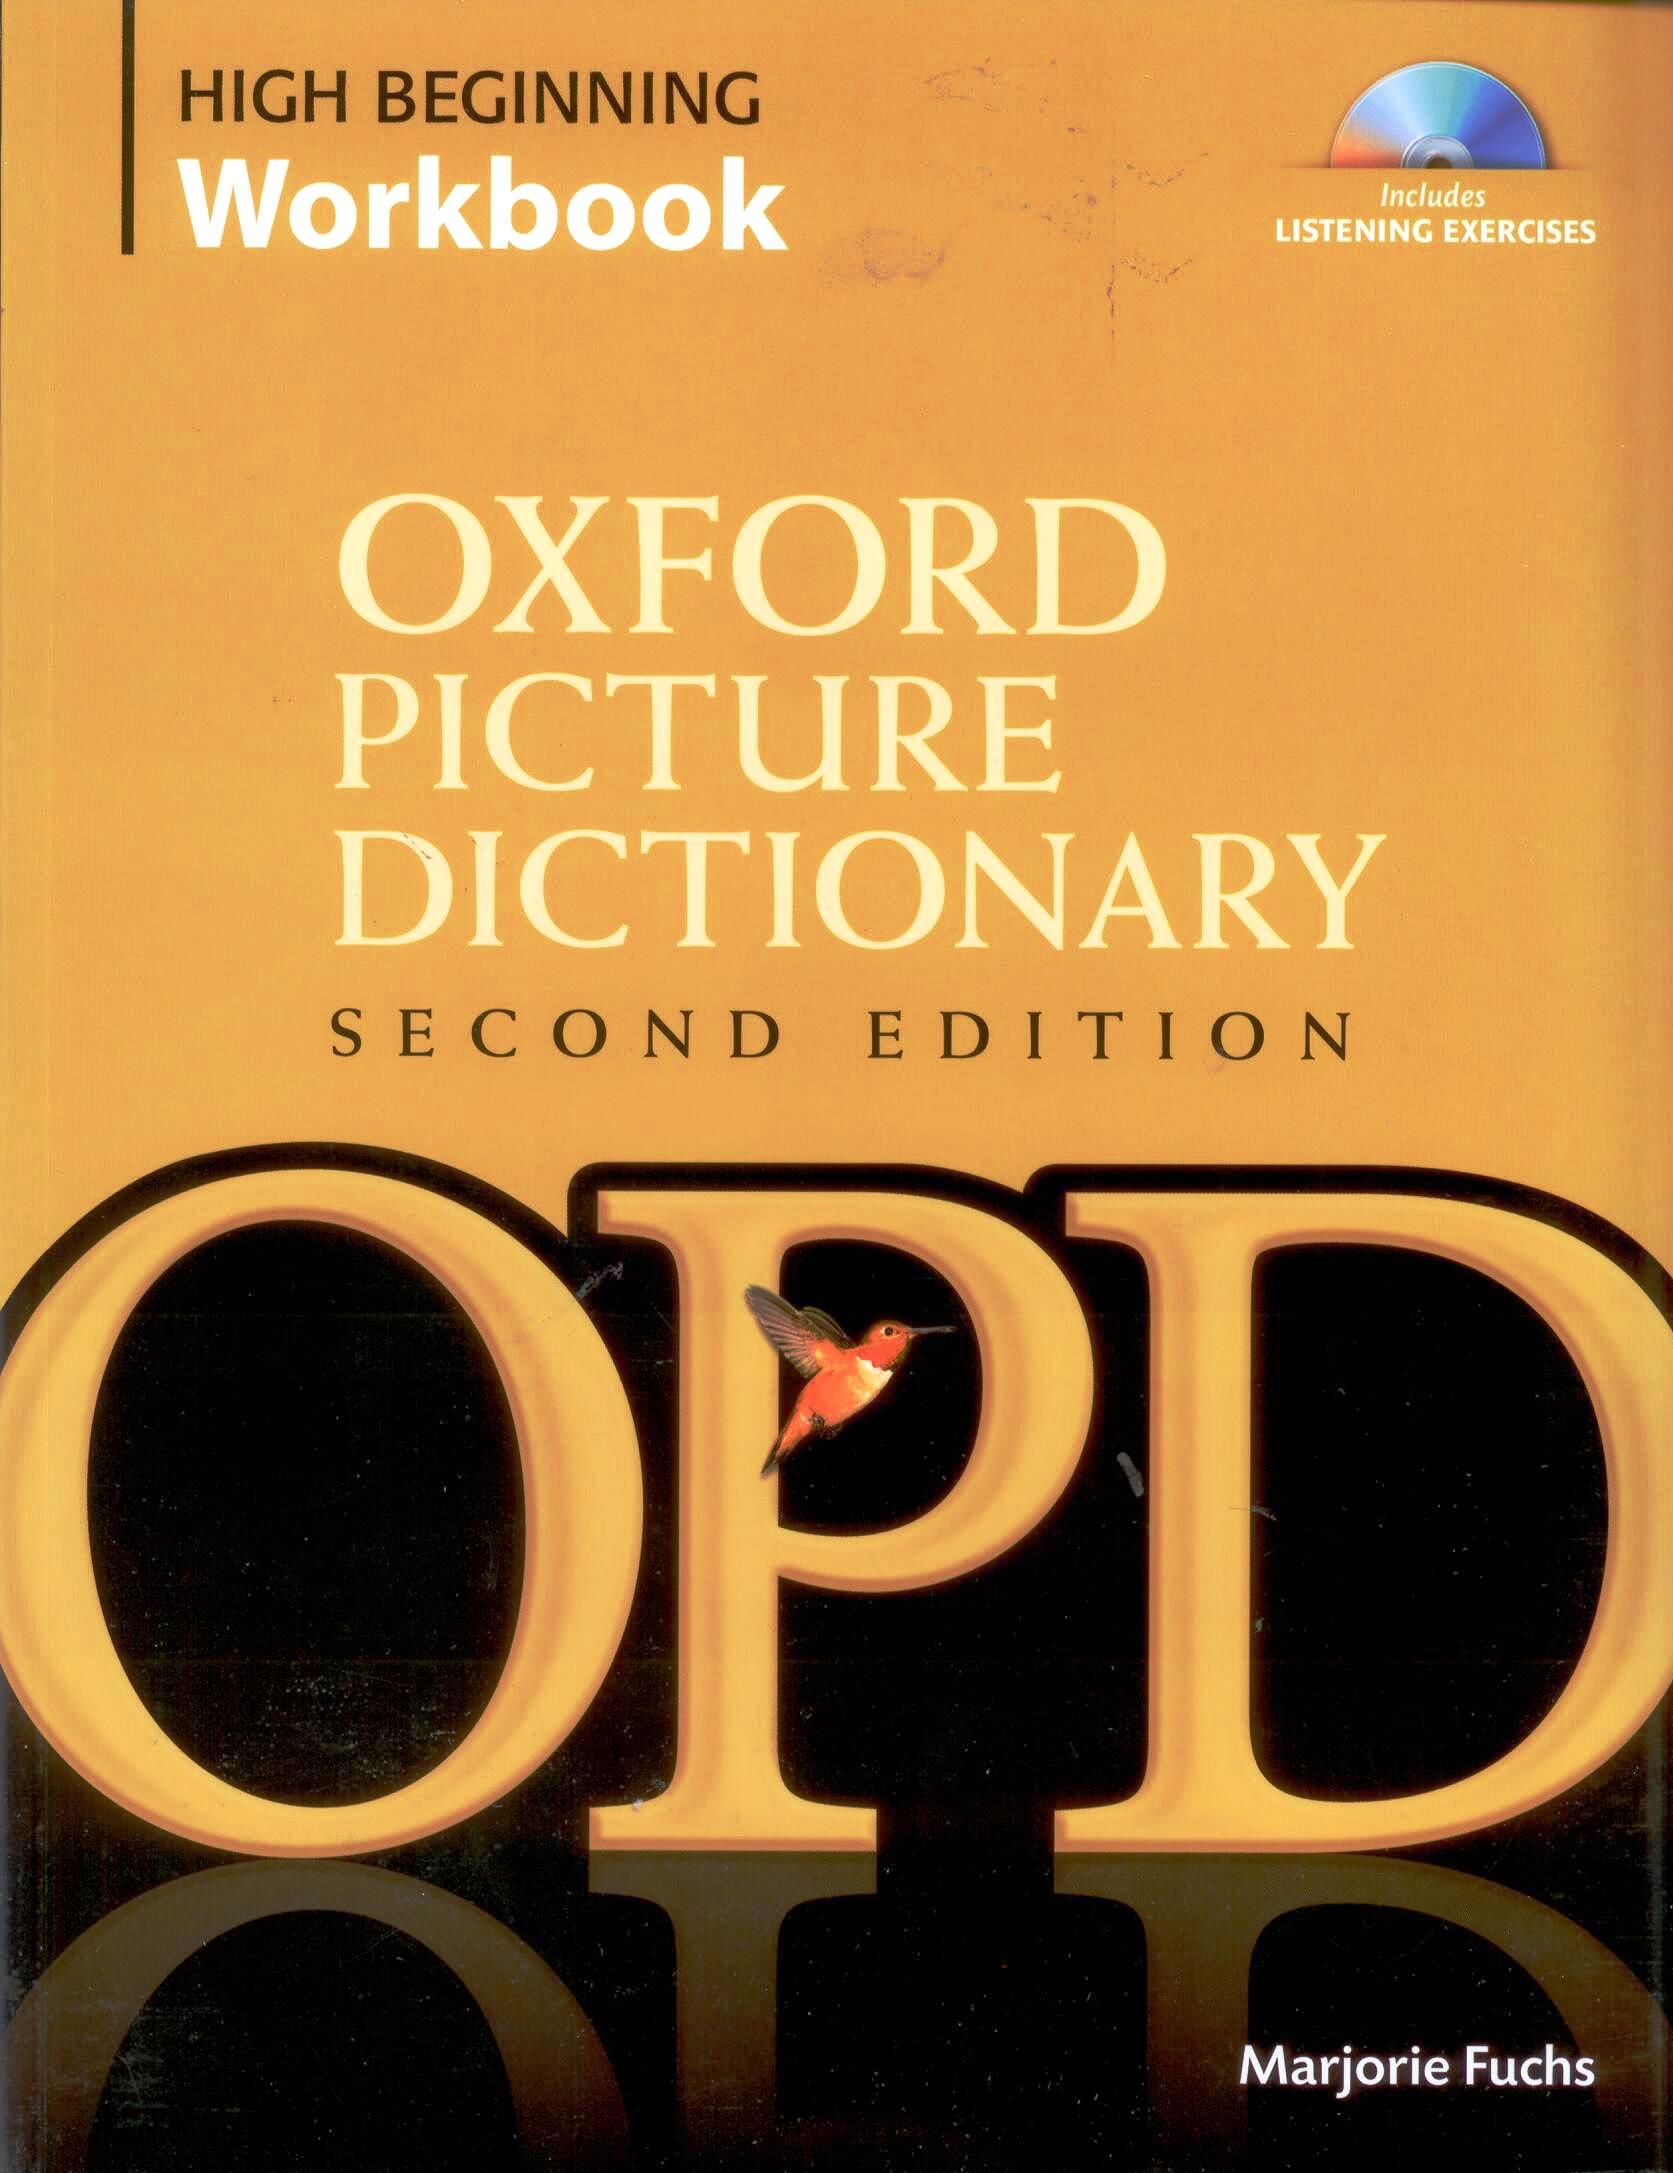 Oxford Picture Dictionary (Second Edition) High-Beginner Workbook